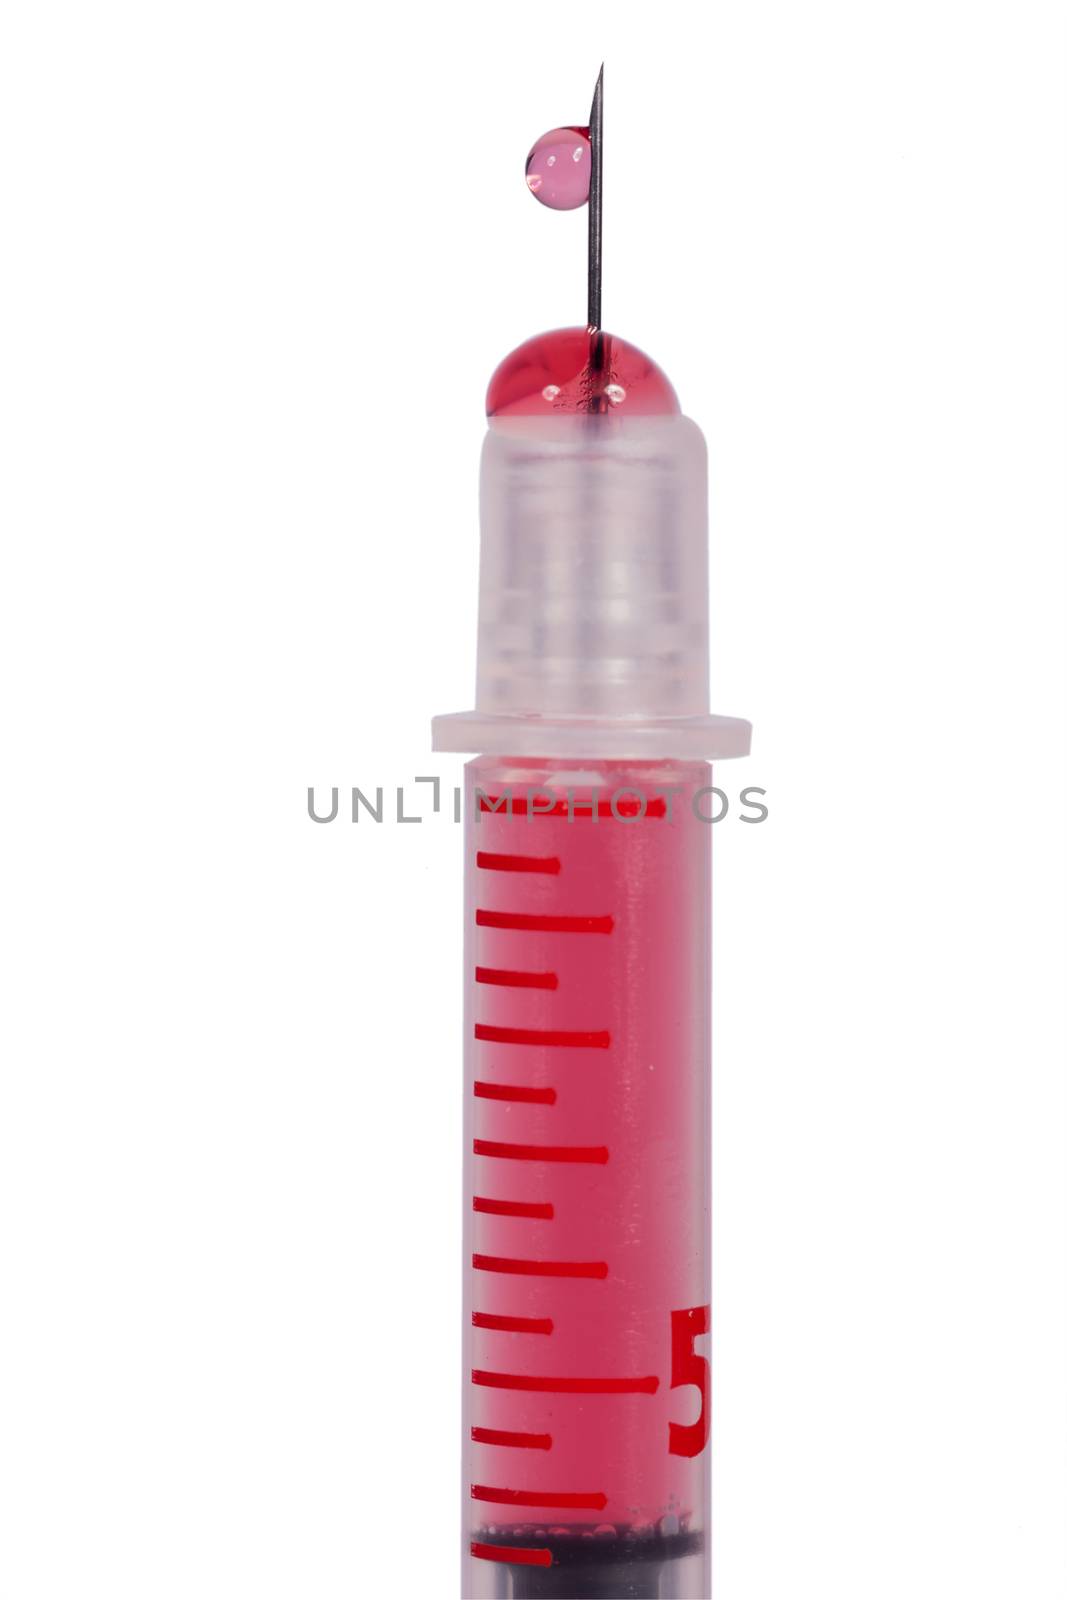 Disposable plastic hypodermic syringe and needle filled with a red solution for administering drugs subcutaneously or intramuscular isolated on white